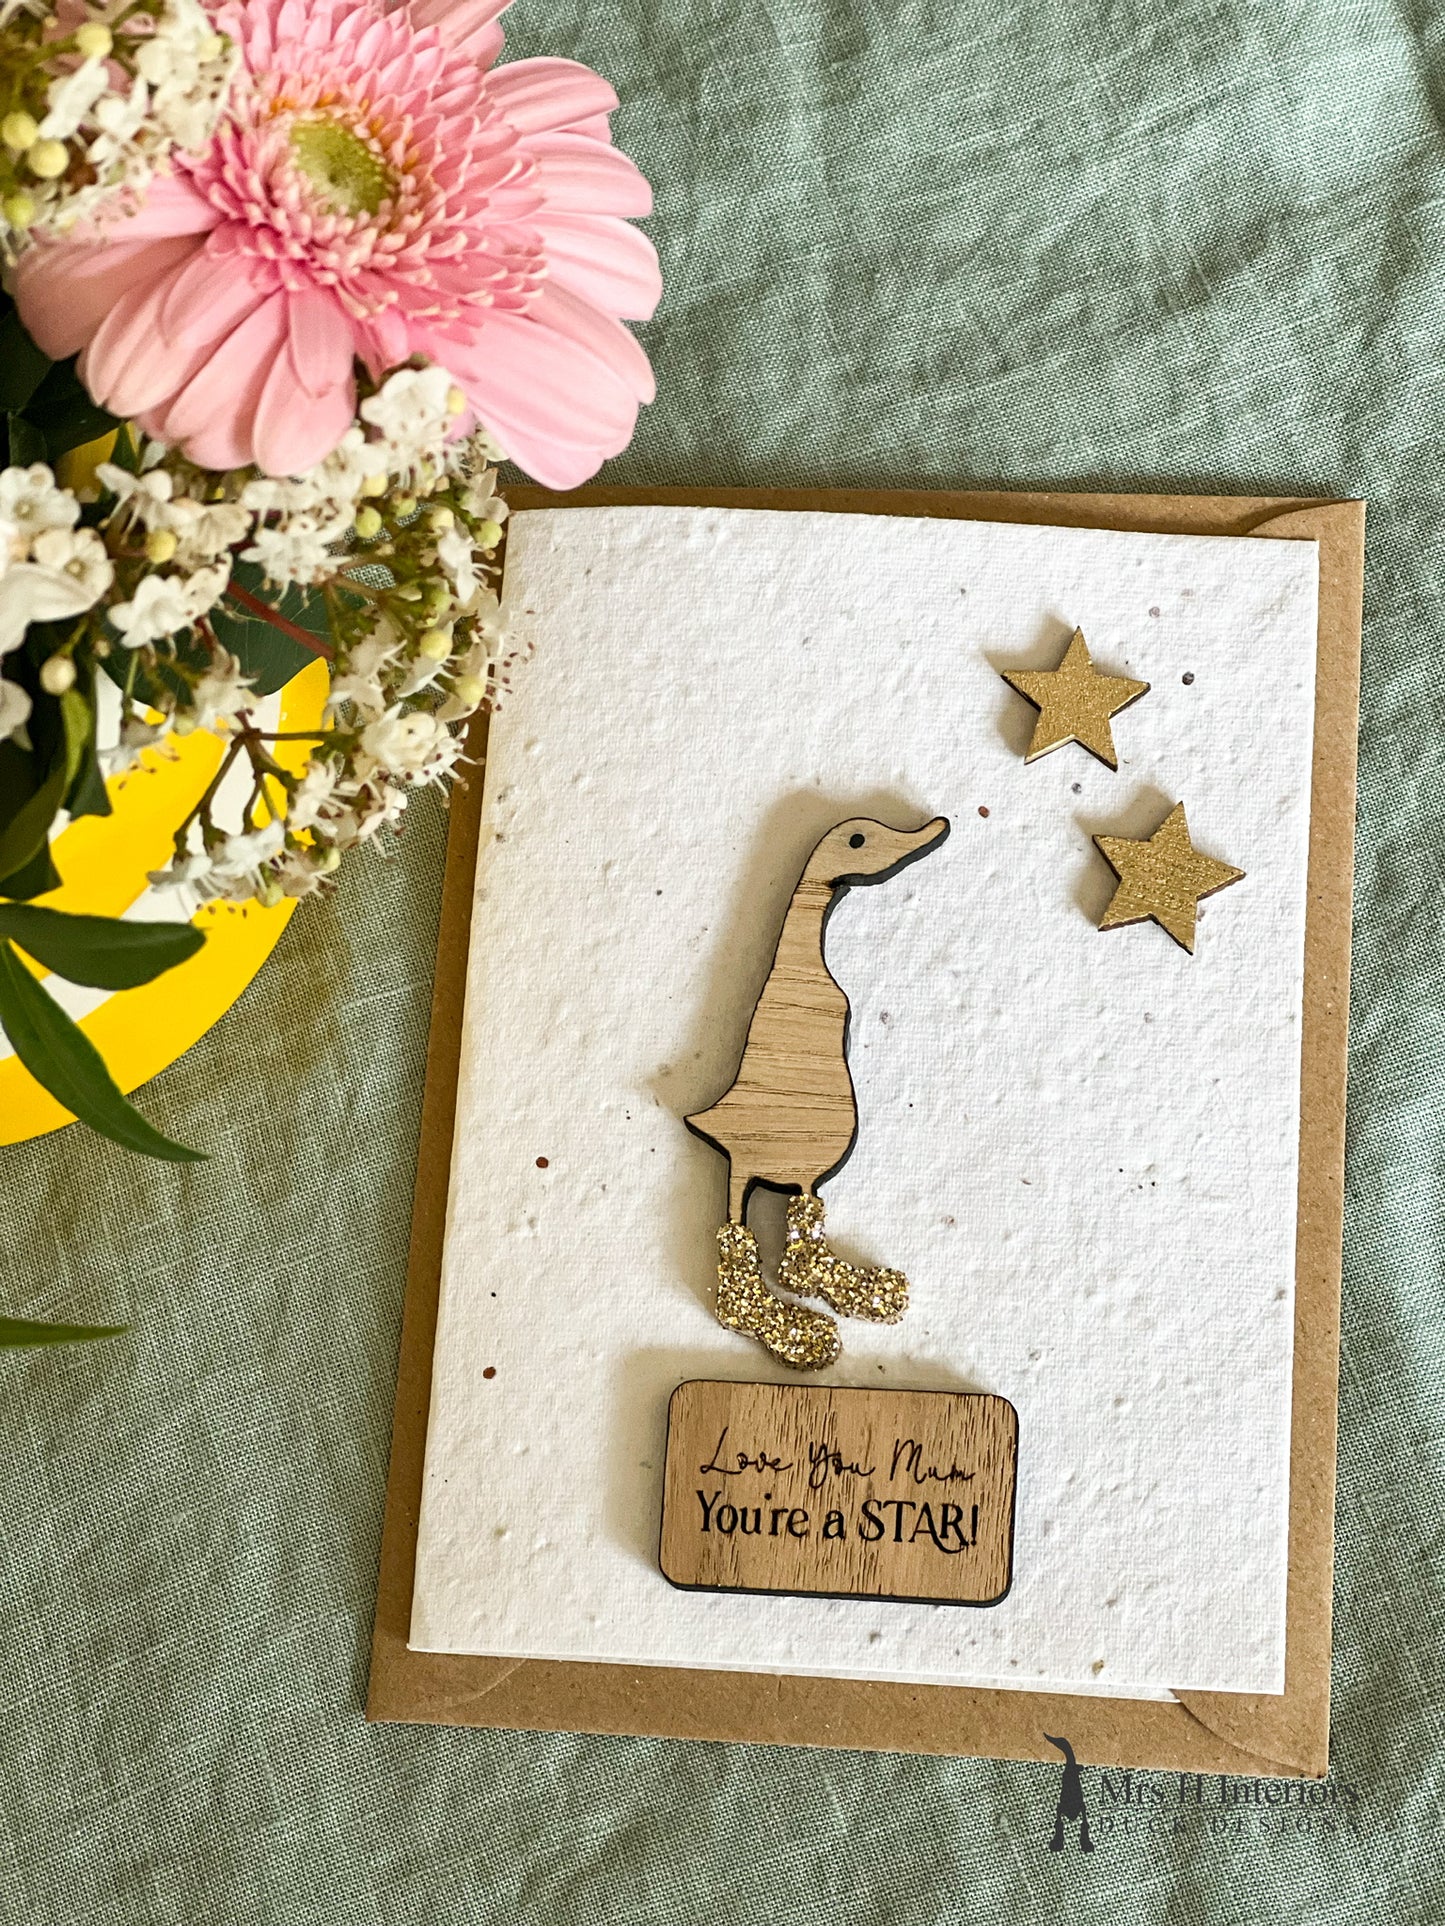 Love You Mum, You're a Star - Duck with Stars - Mother's Day Card - Decorated Wooden Duck in Boots by Mrs H the Duck Lady